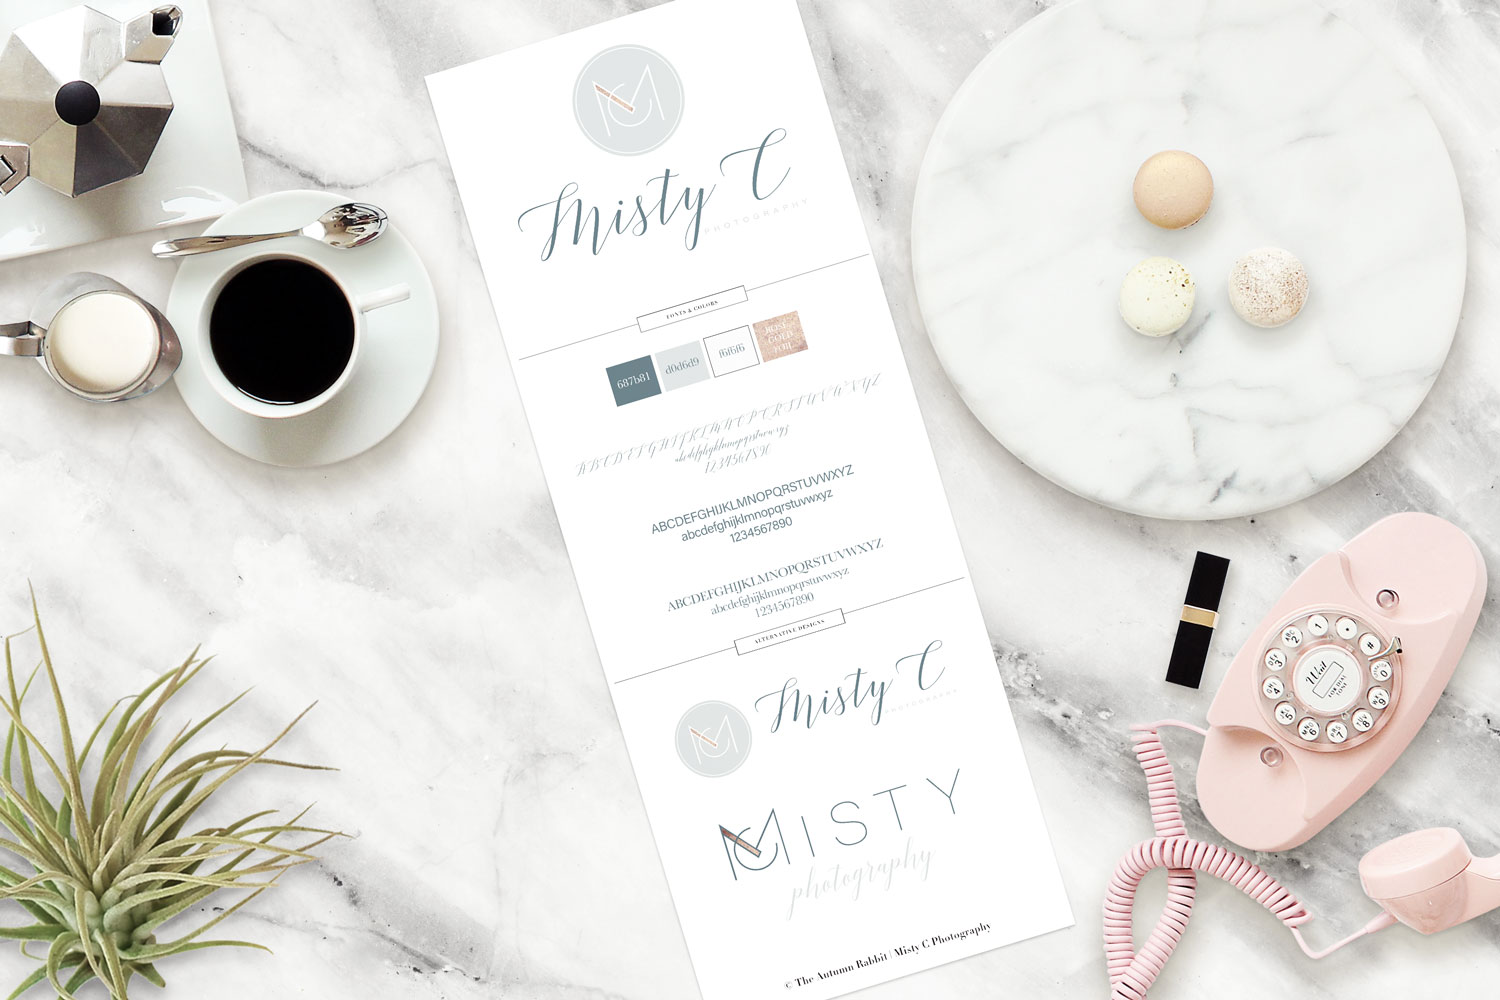 Rebrand with the autumn rabbit Branding Board for Wenatchee Photographer Misty C. Photography